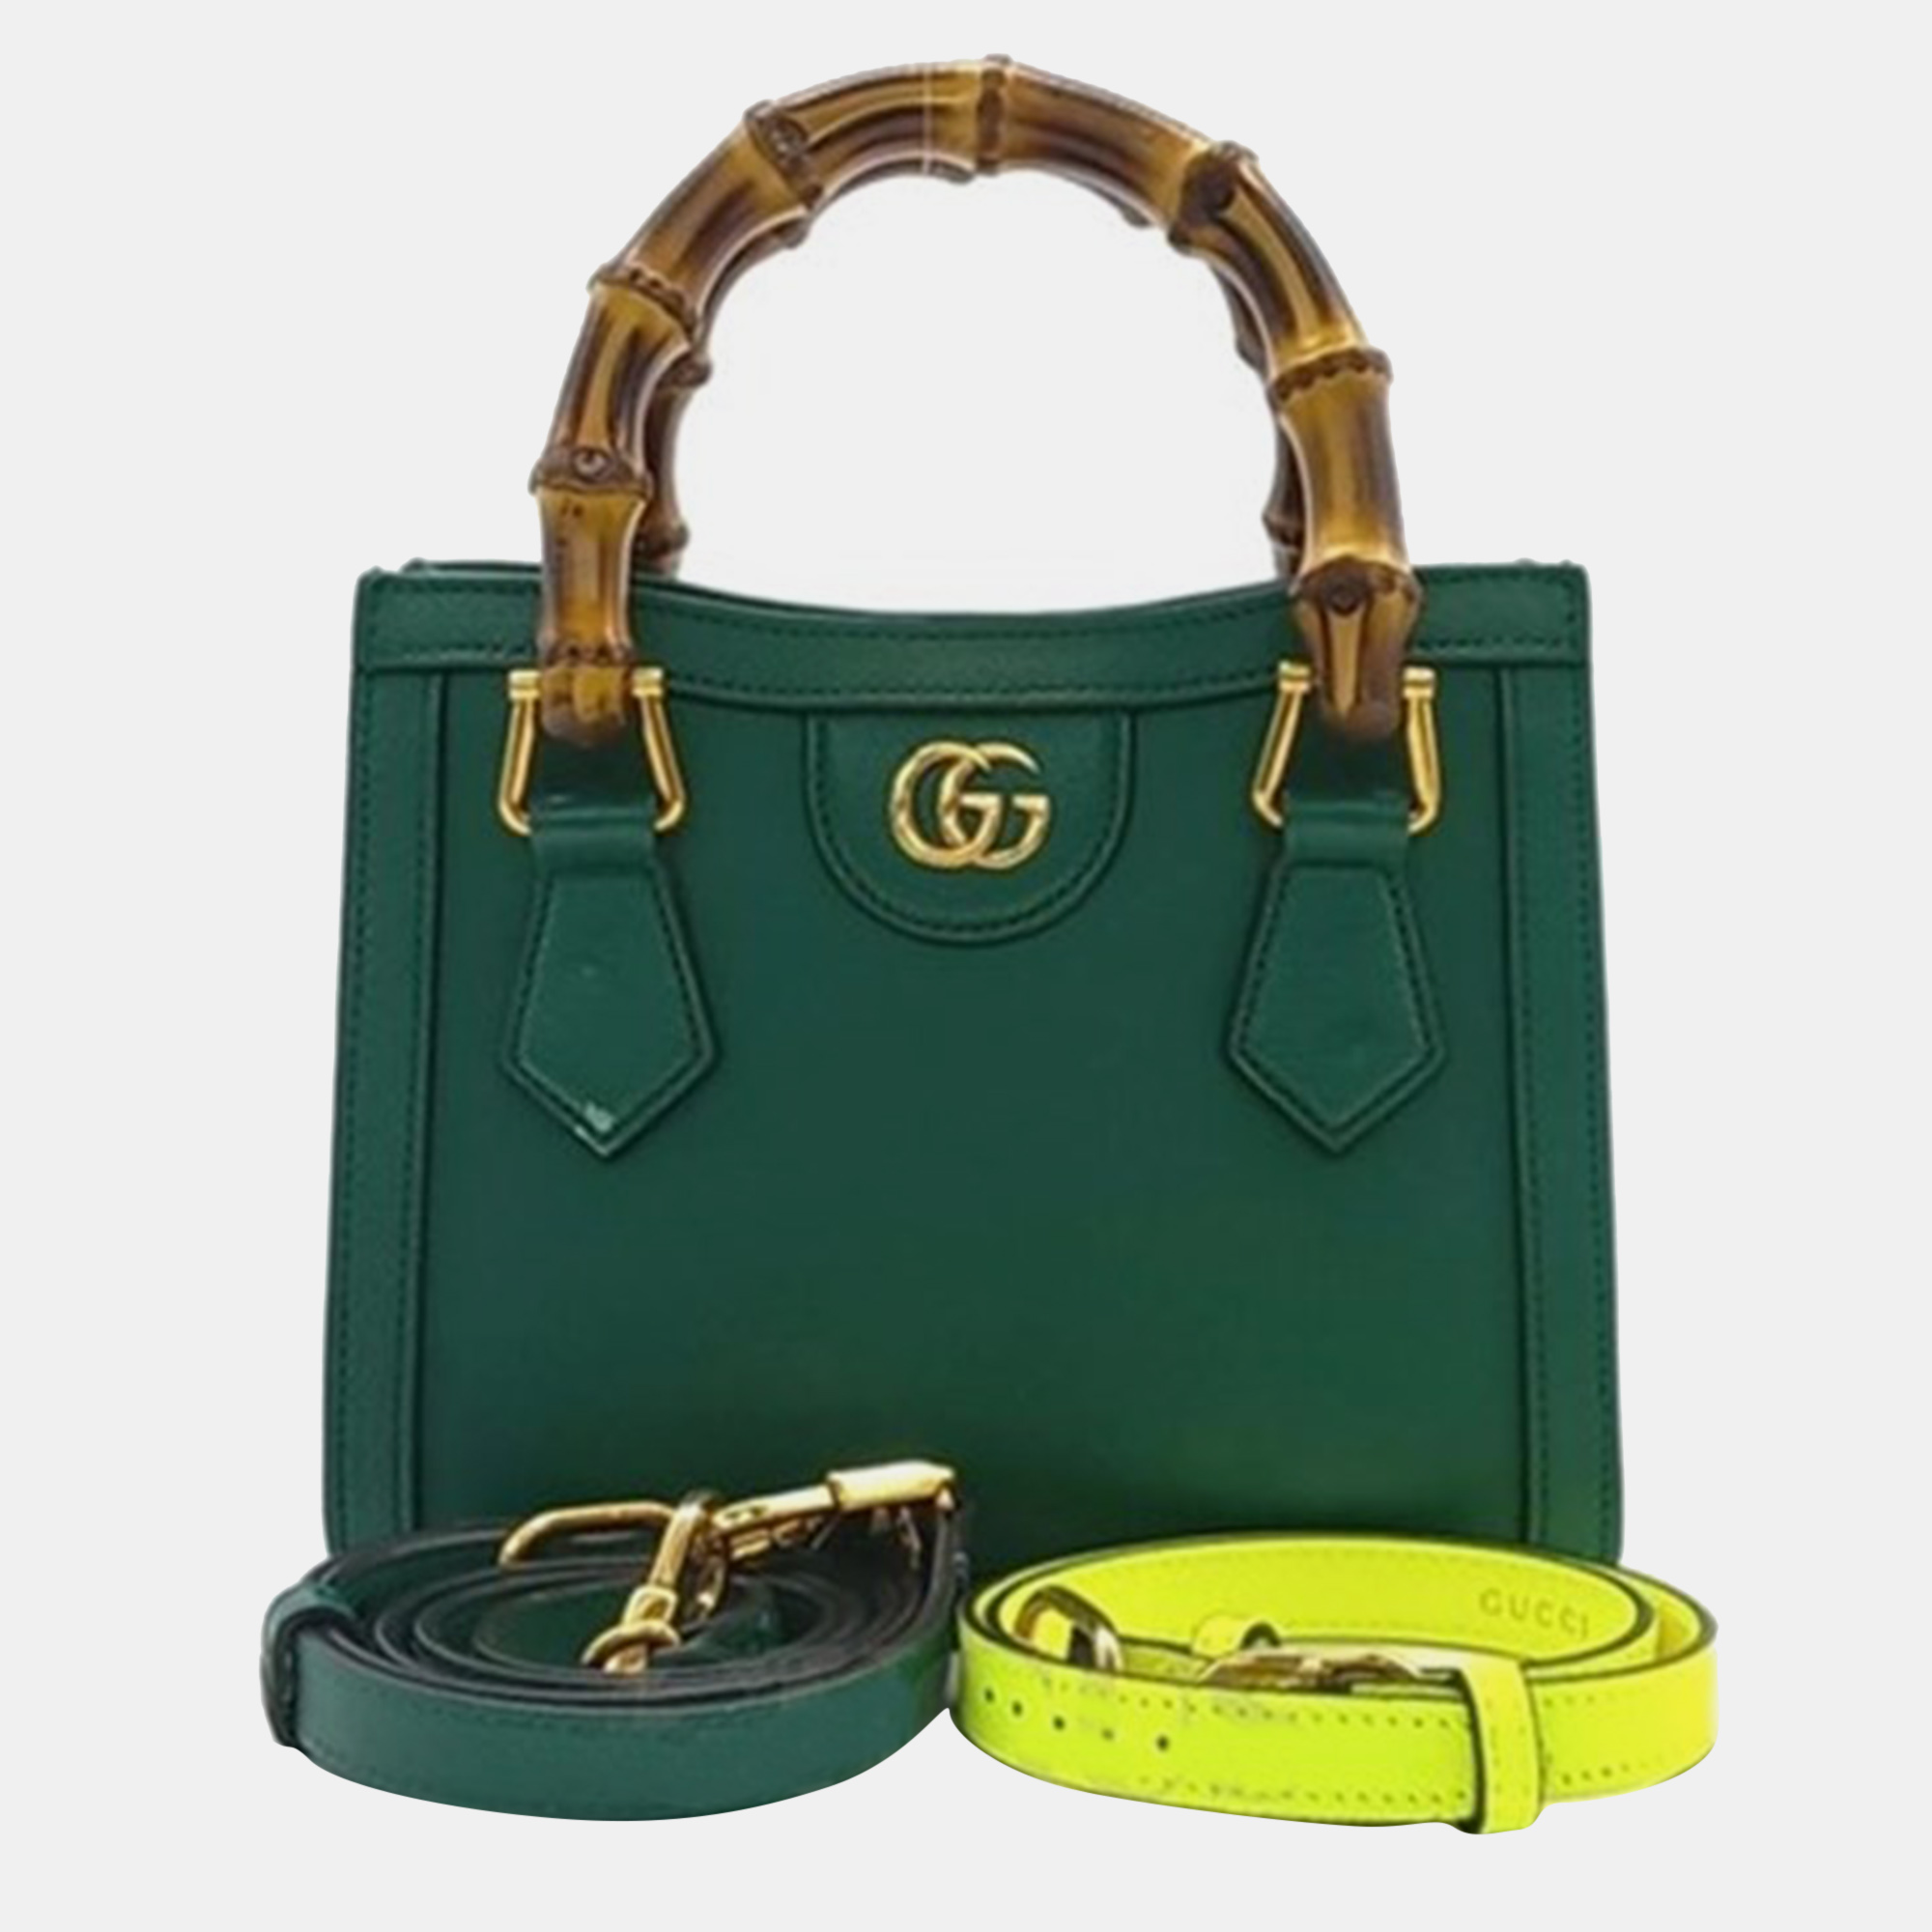 Indulge in timeless elegance with this Gucci bag meticulously crafted to perfection. Its exquisite details and luxurious materials make it a statement piece for any sophisticated ensemble.